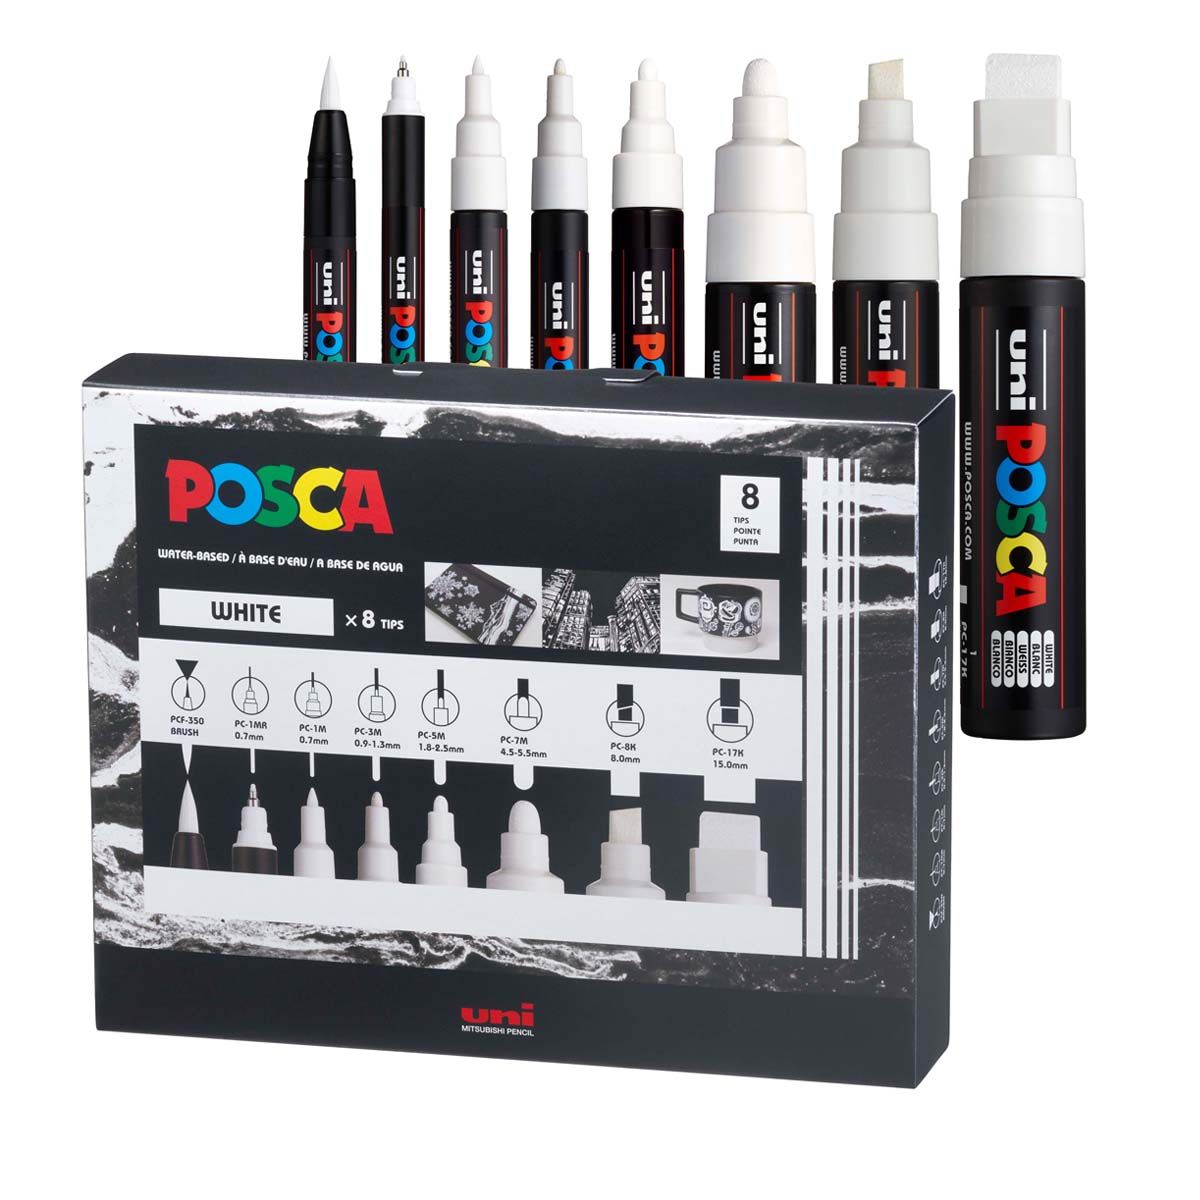 Copic Markers + Fixative? (And other marker brands!) 